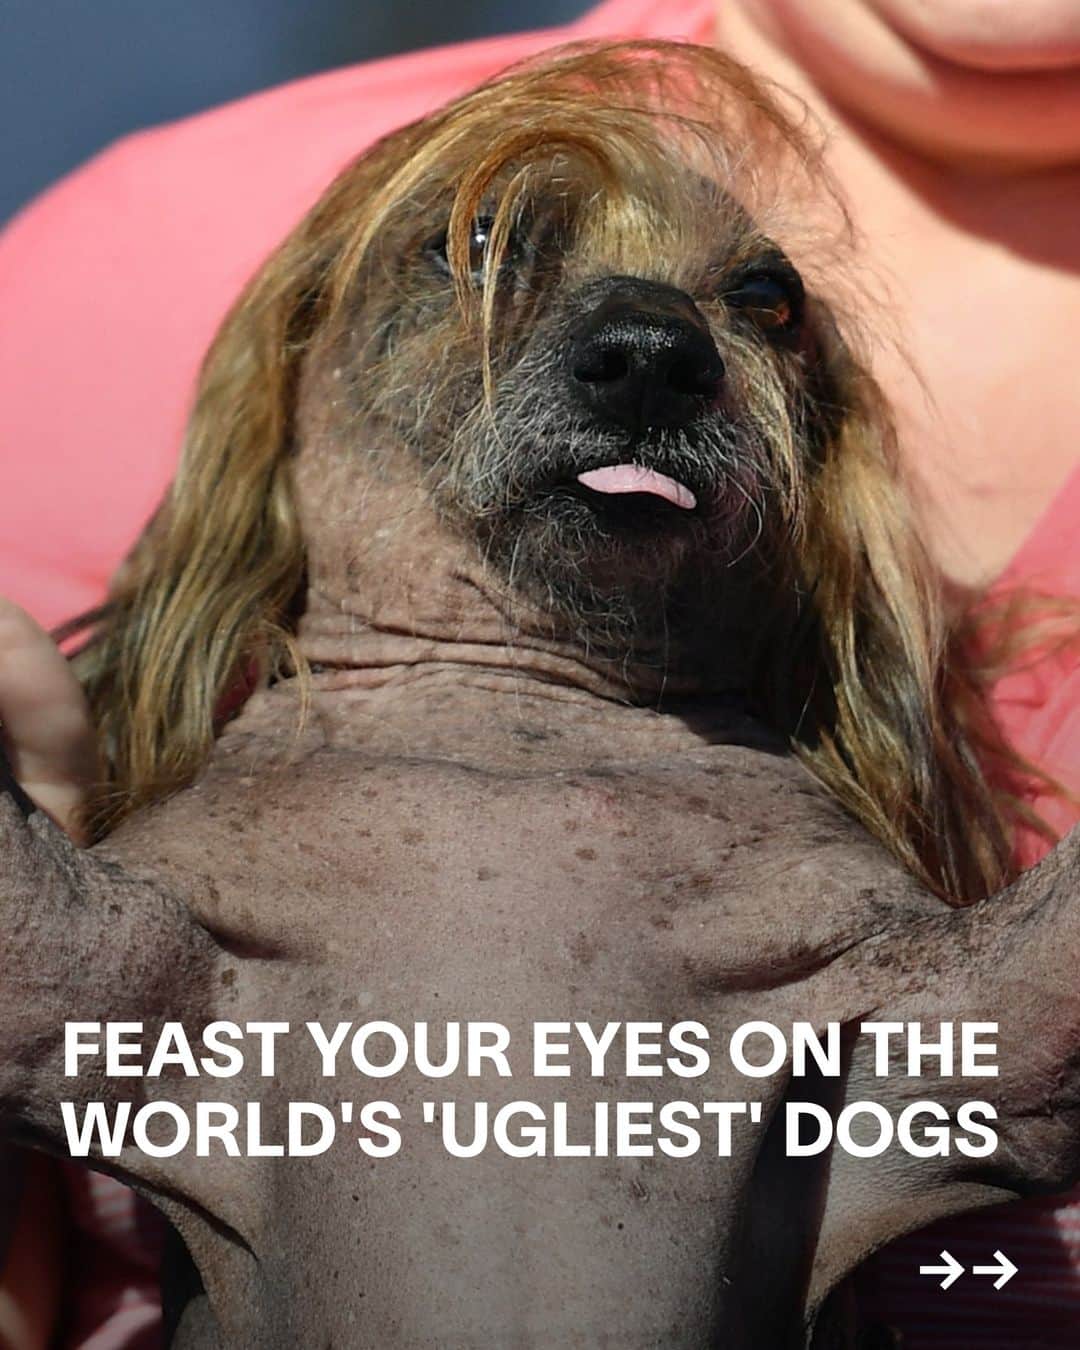 VICEのインスタグラム：「Every summer, California welcomes a load of one-of-a-kind pooches to the annual World's Ugliest Dog Contest.  The competition is, of course, not about making fun of "ugly" dogs – that would be very mean. Instead, organisers say the event is a celebration of the "imperfections that make all dogs special and unique", and is intended to show that "these dogs are really beautiful".   Feast your eyes on some of the beautiful canine competitors from over the years.」